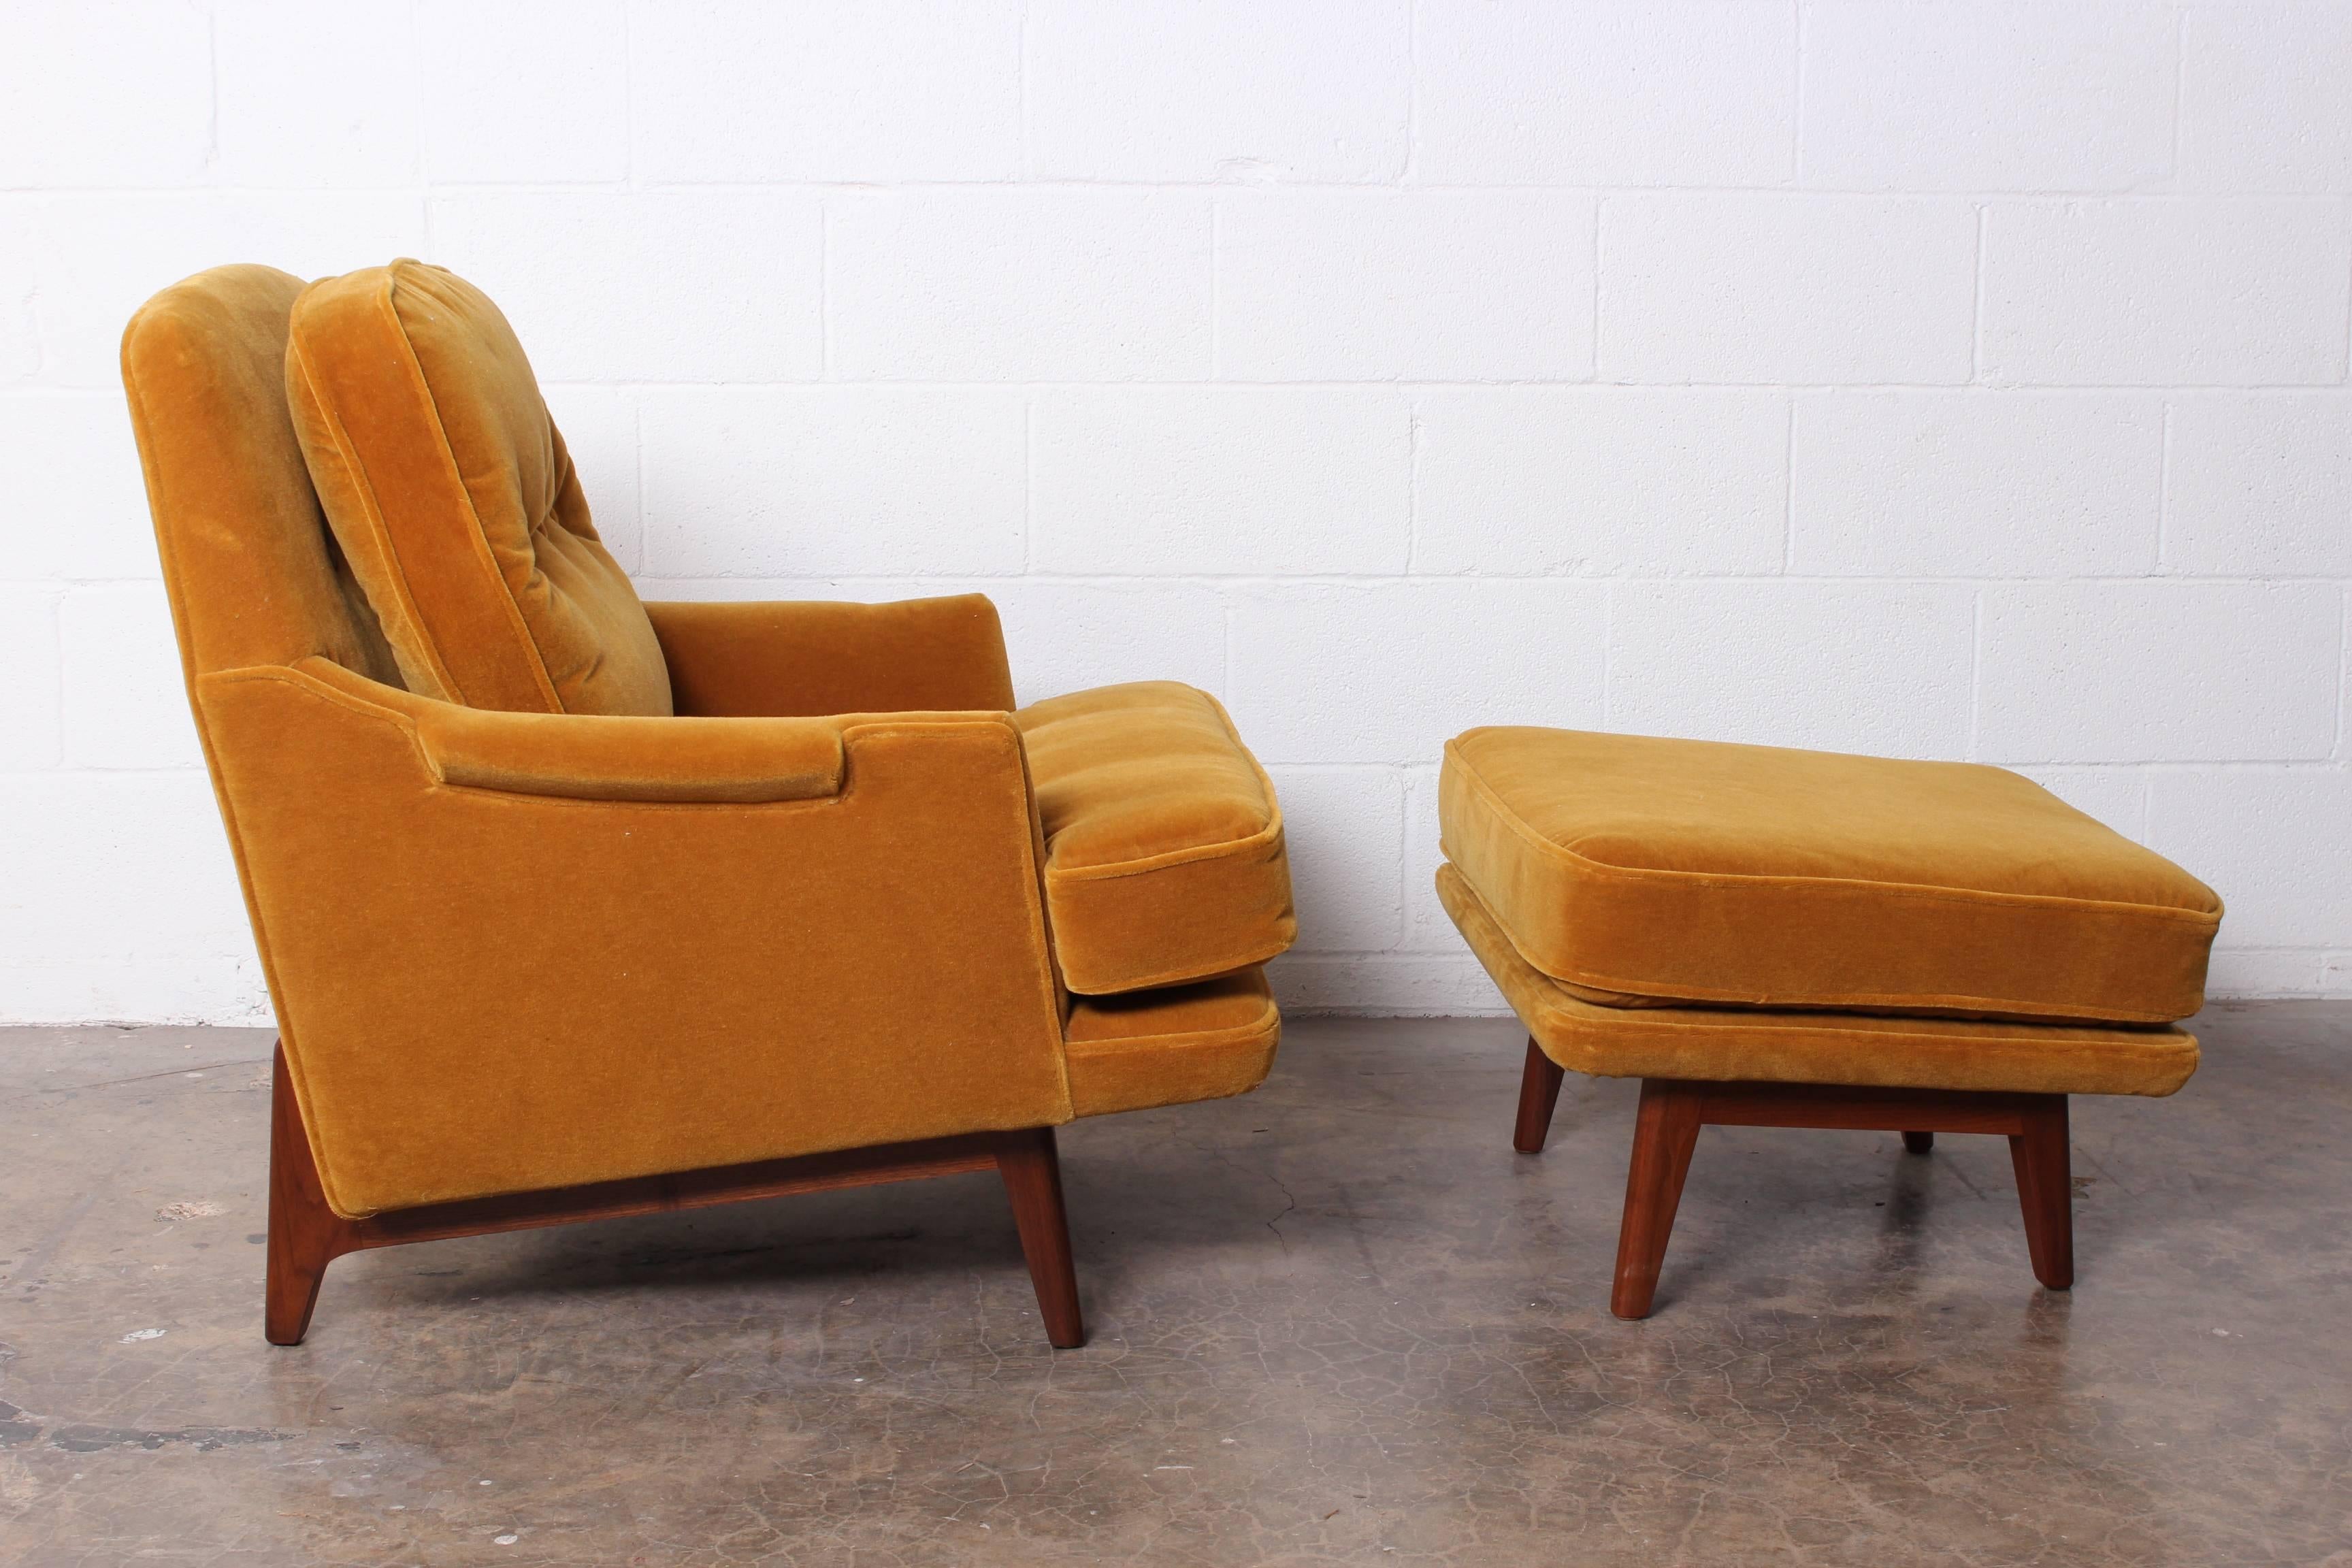 A Dunbar lounge chair and ottoman with mahogany base and mohair upholstery.